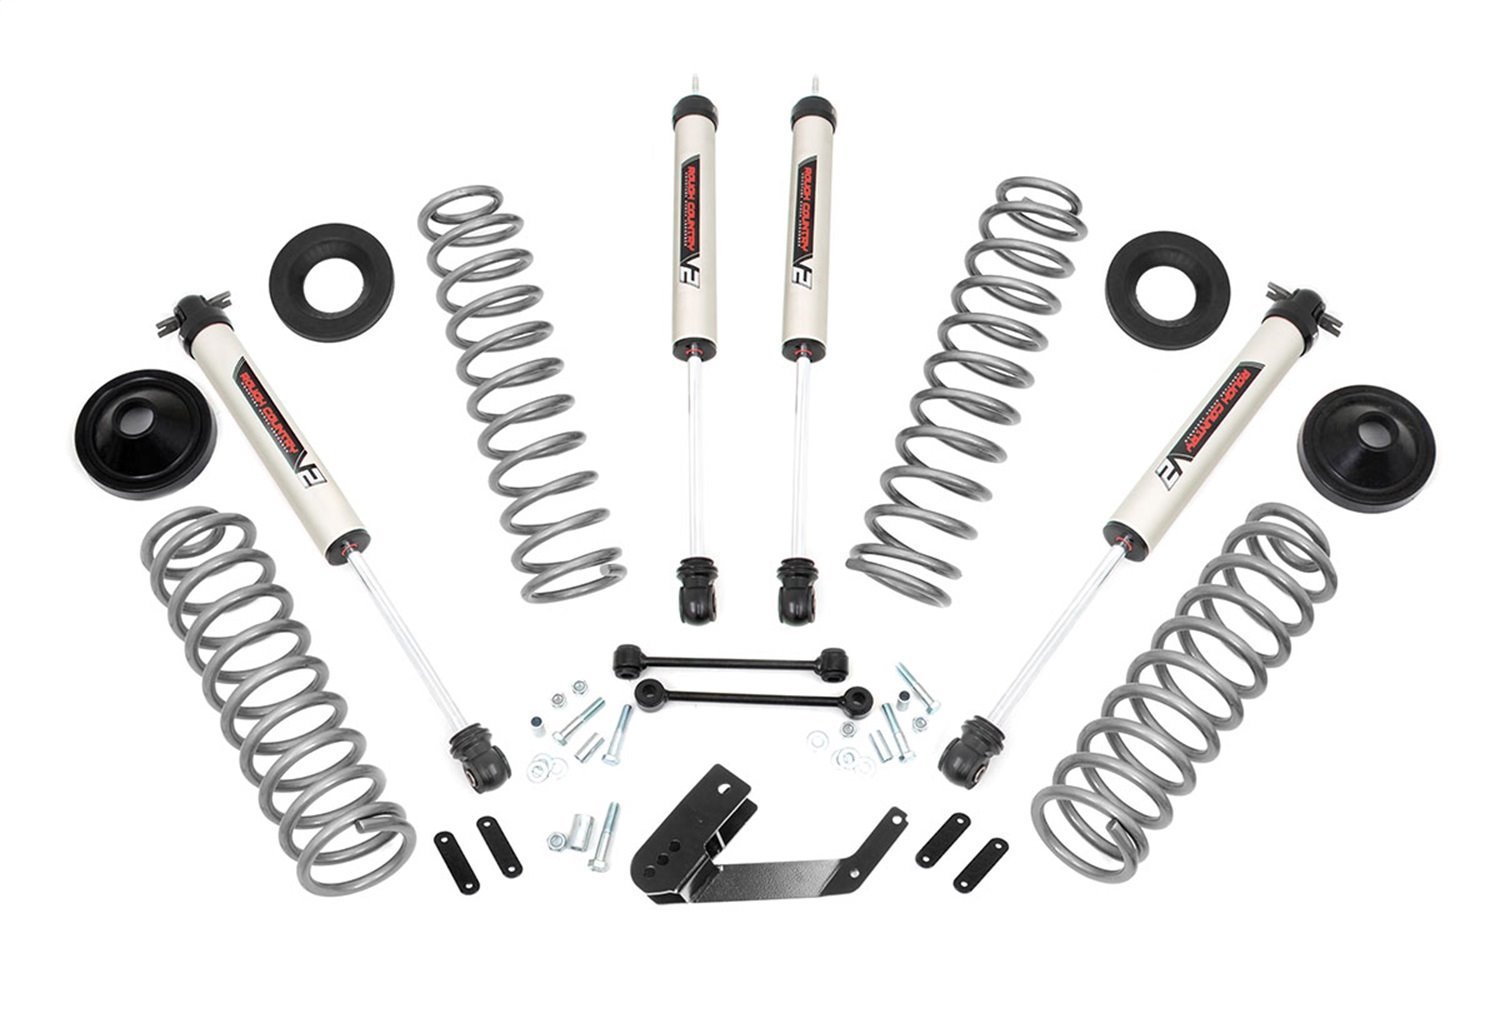 67670 Front and Rear Suspension Lift Kit, Lift Amount: 3.25 in. Front/3.25 in. Rear